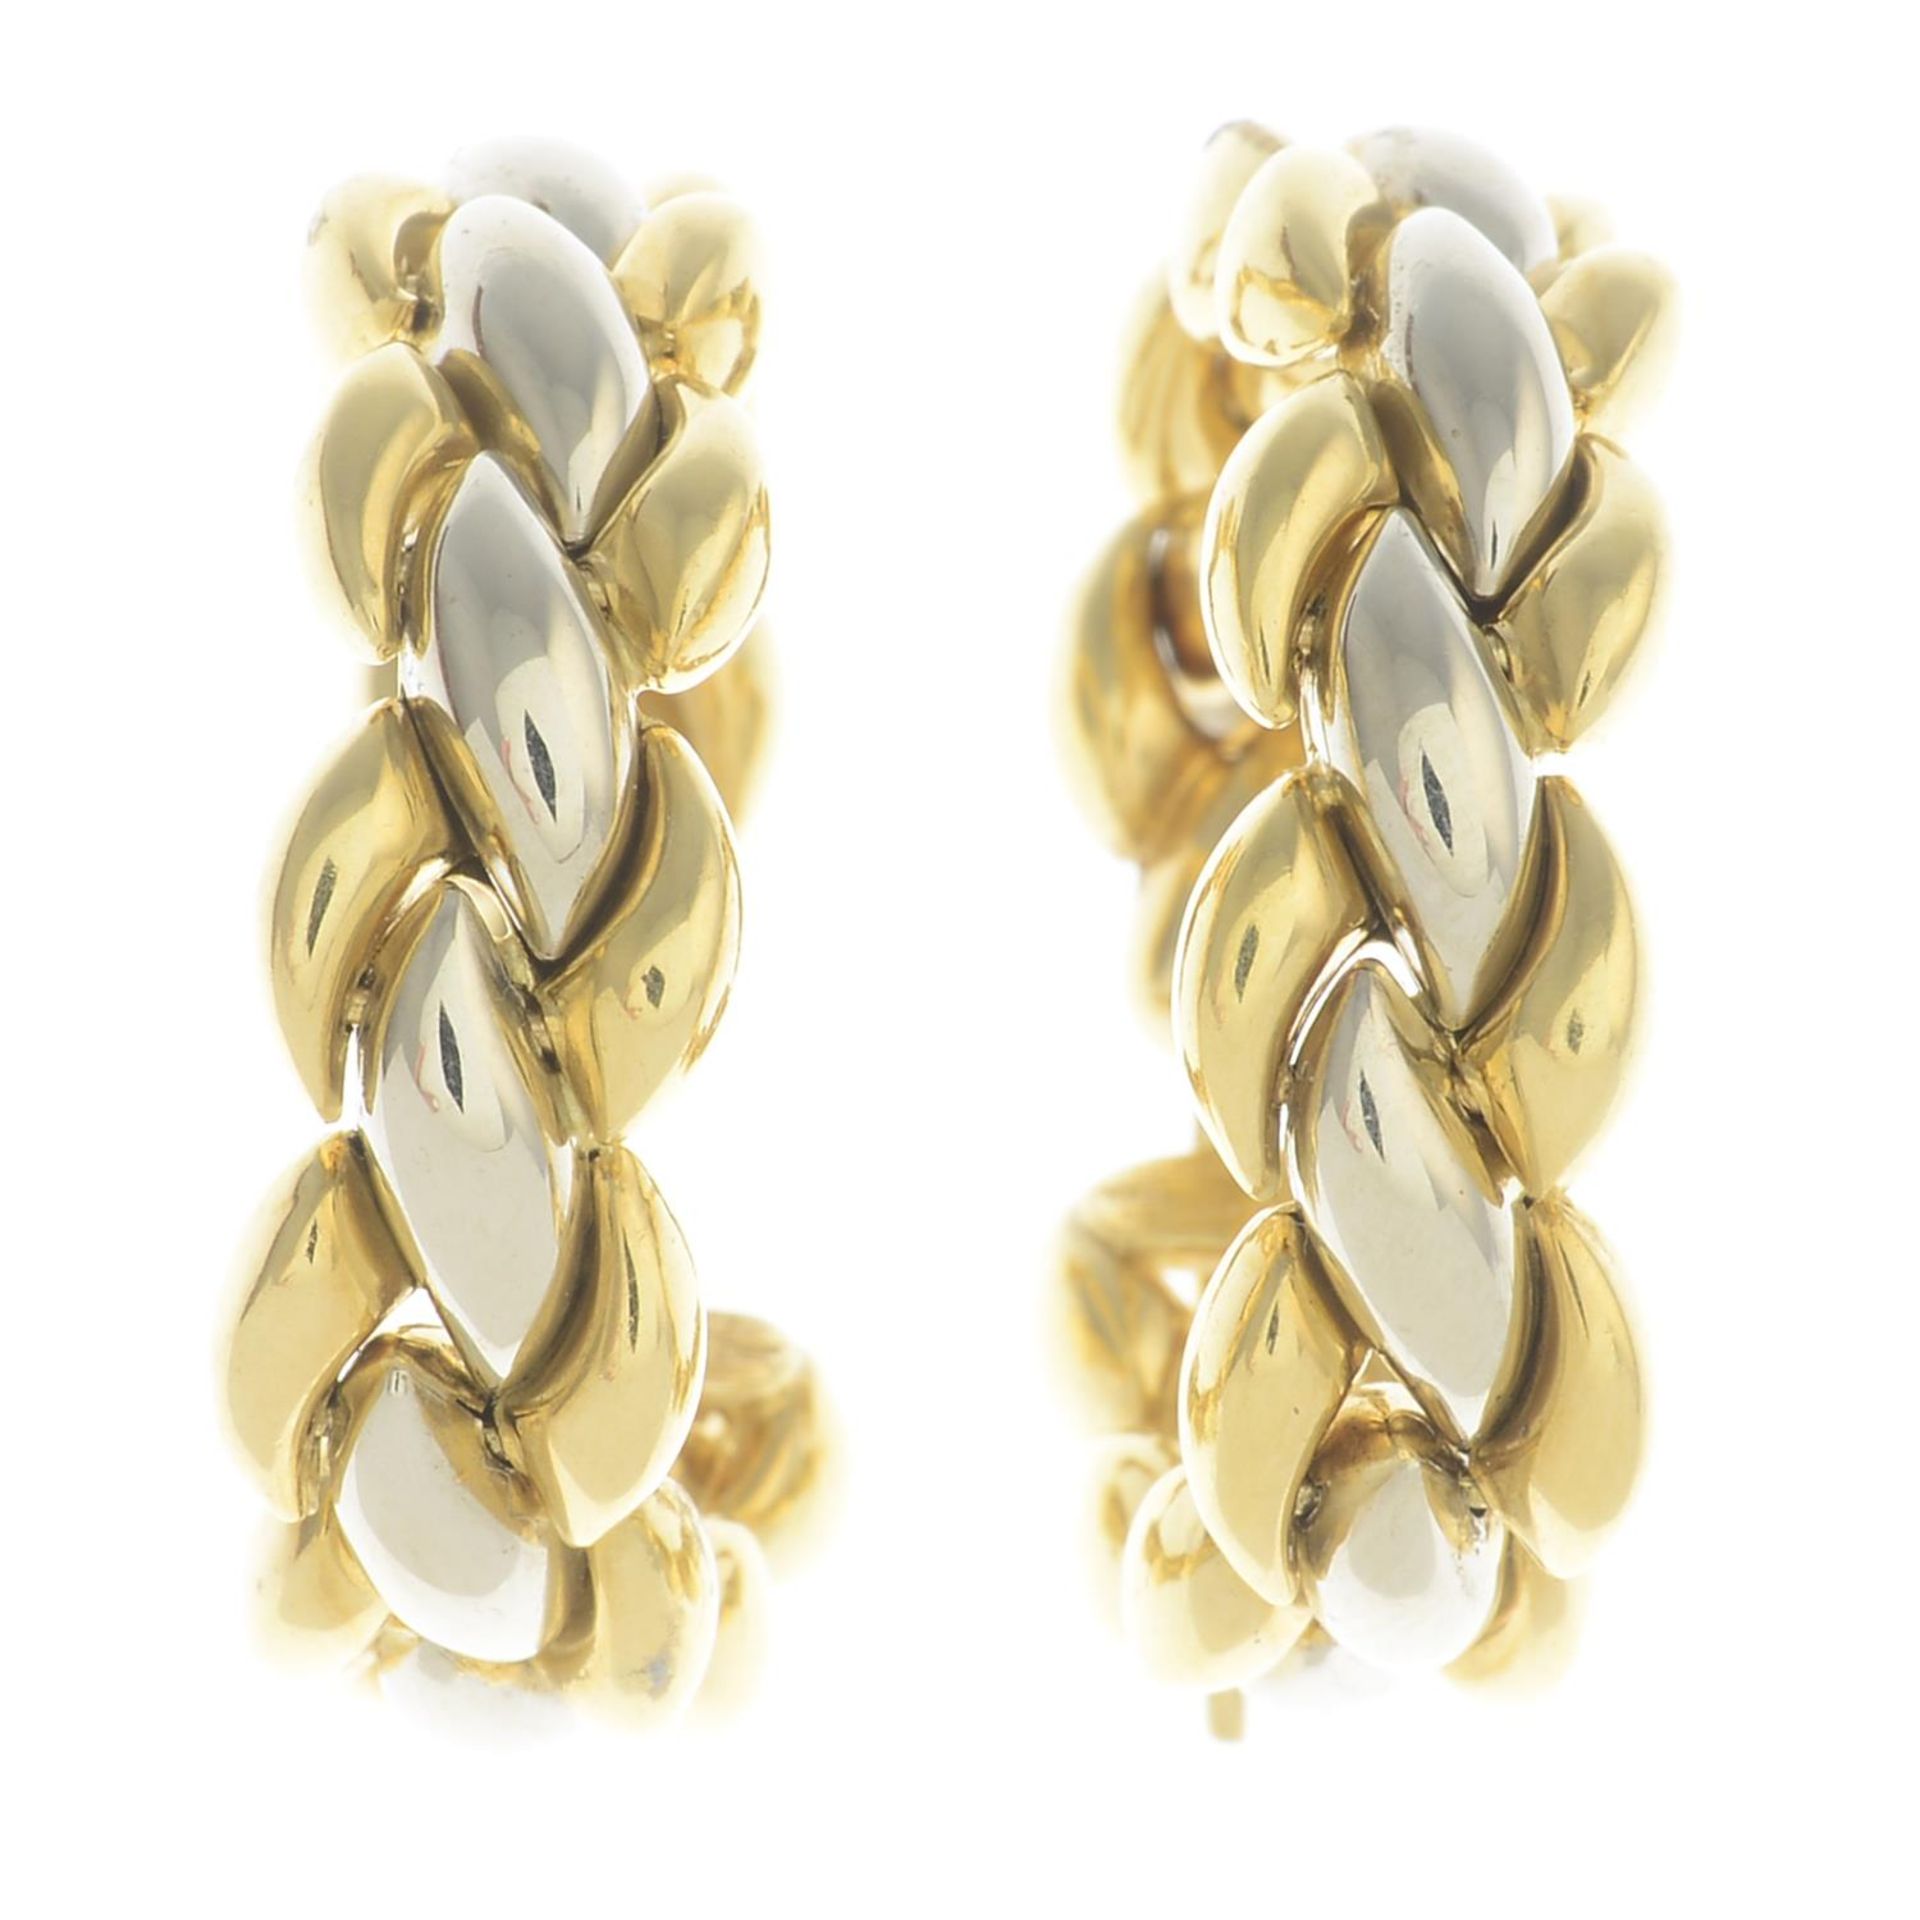 A pair of bi-colour 18ct gold hoop earrings, by Chimento.Signed Chimento.